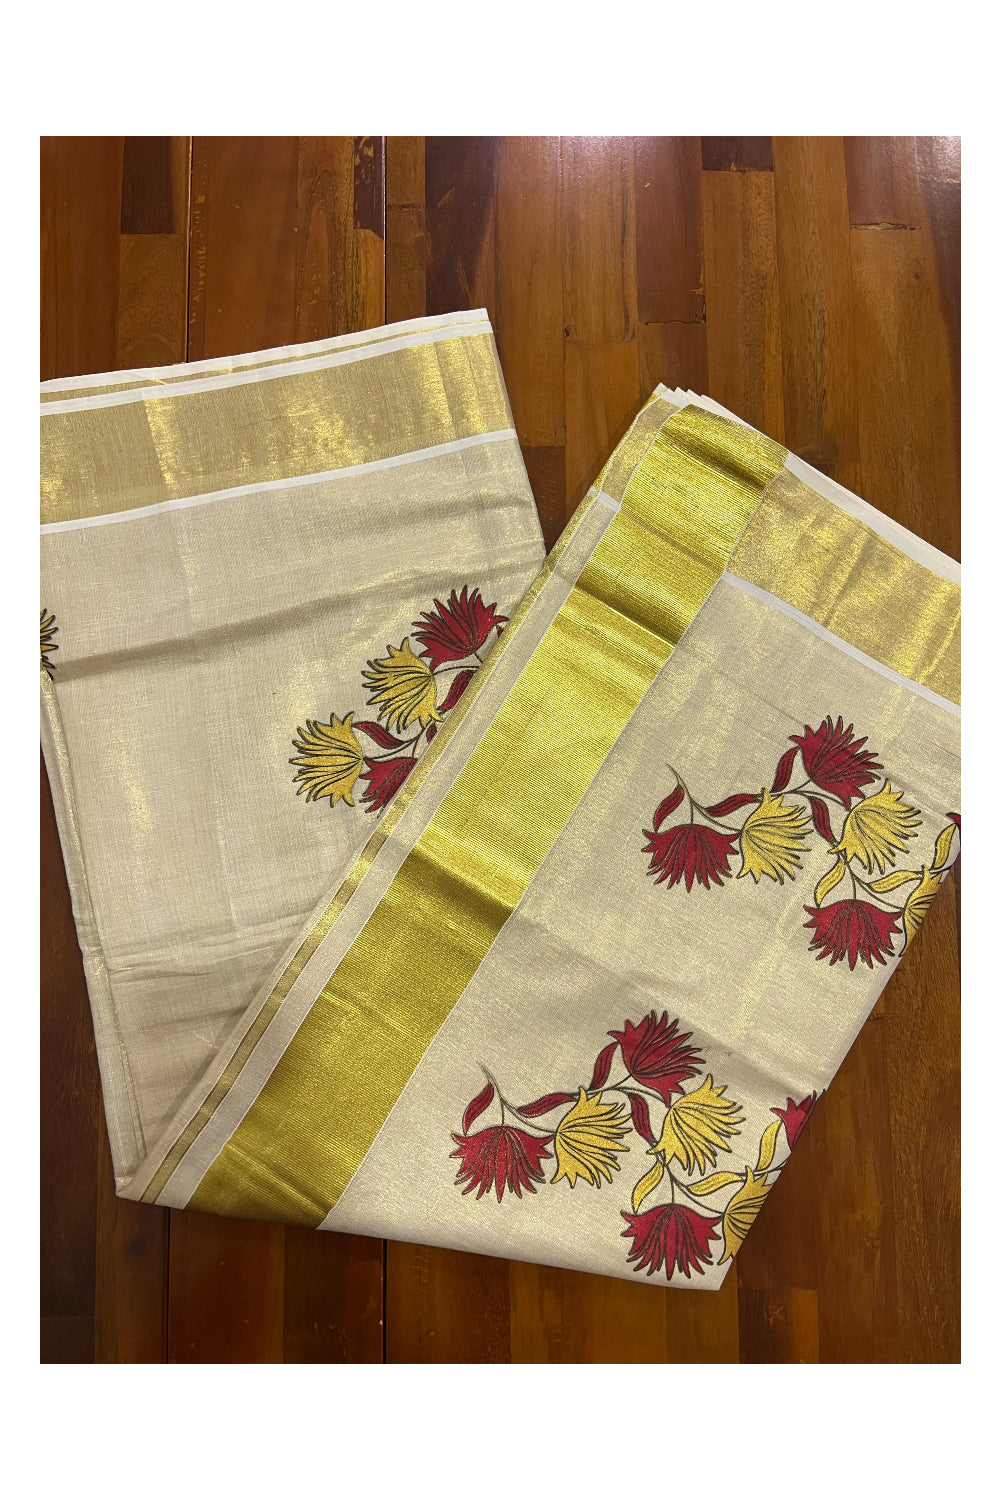 Kerala Tissue Kasavu Saree With Mural Printed Red and Yellow Floral Design